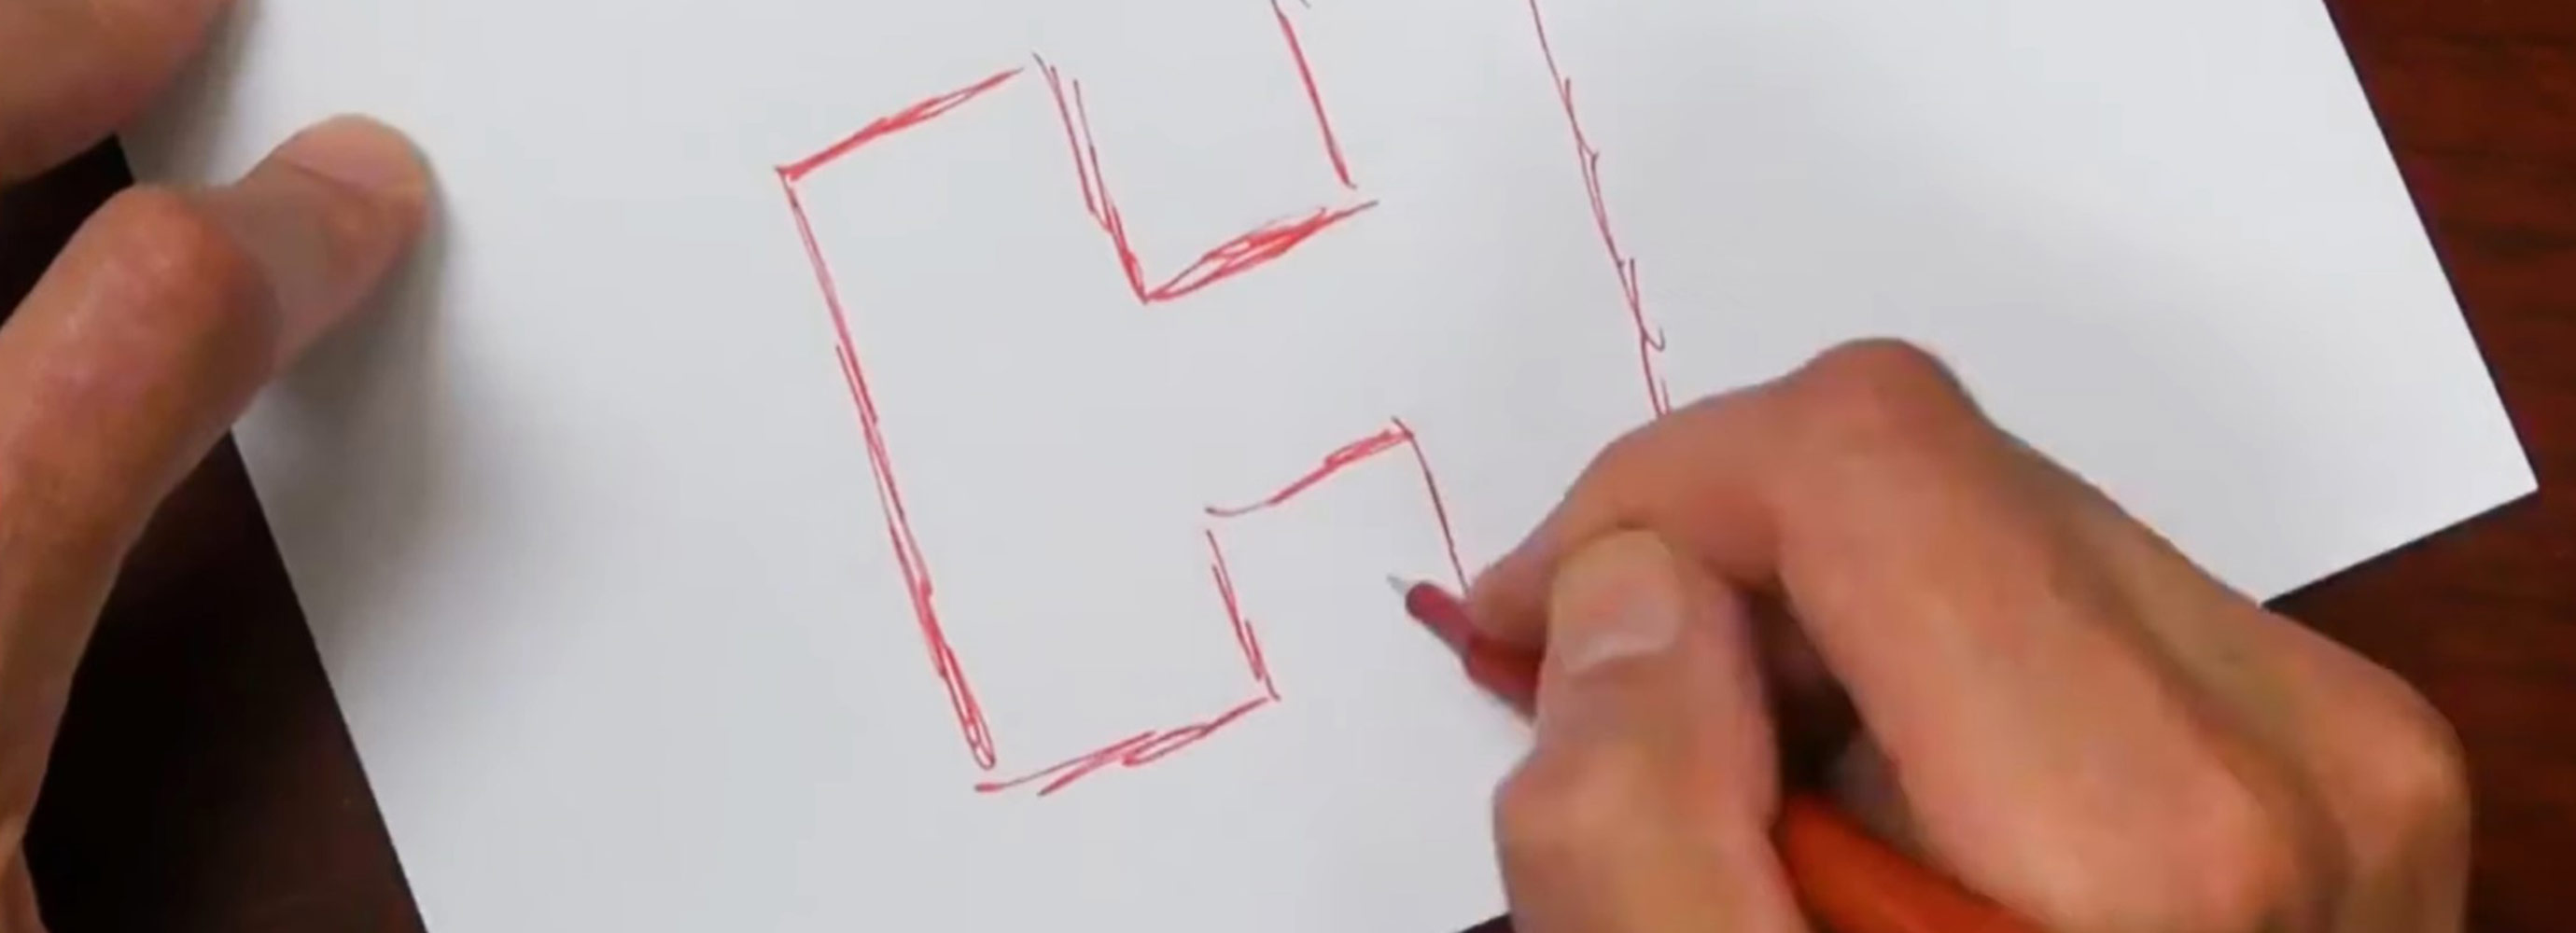 Person sketching logo on paper